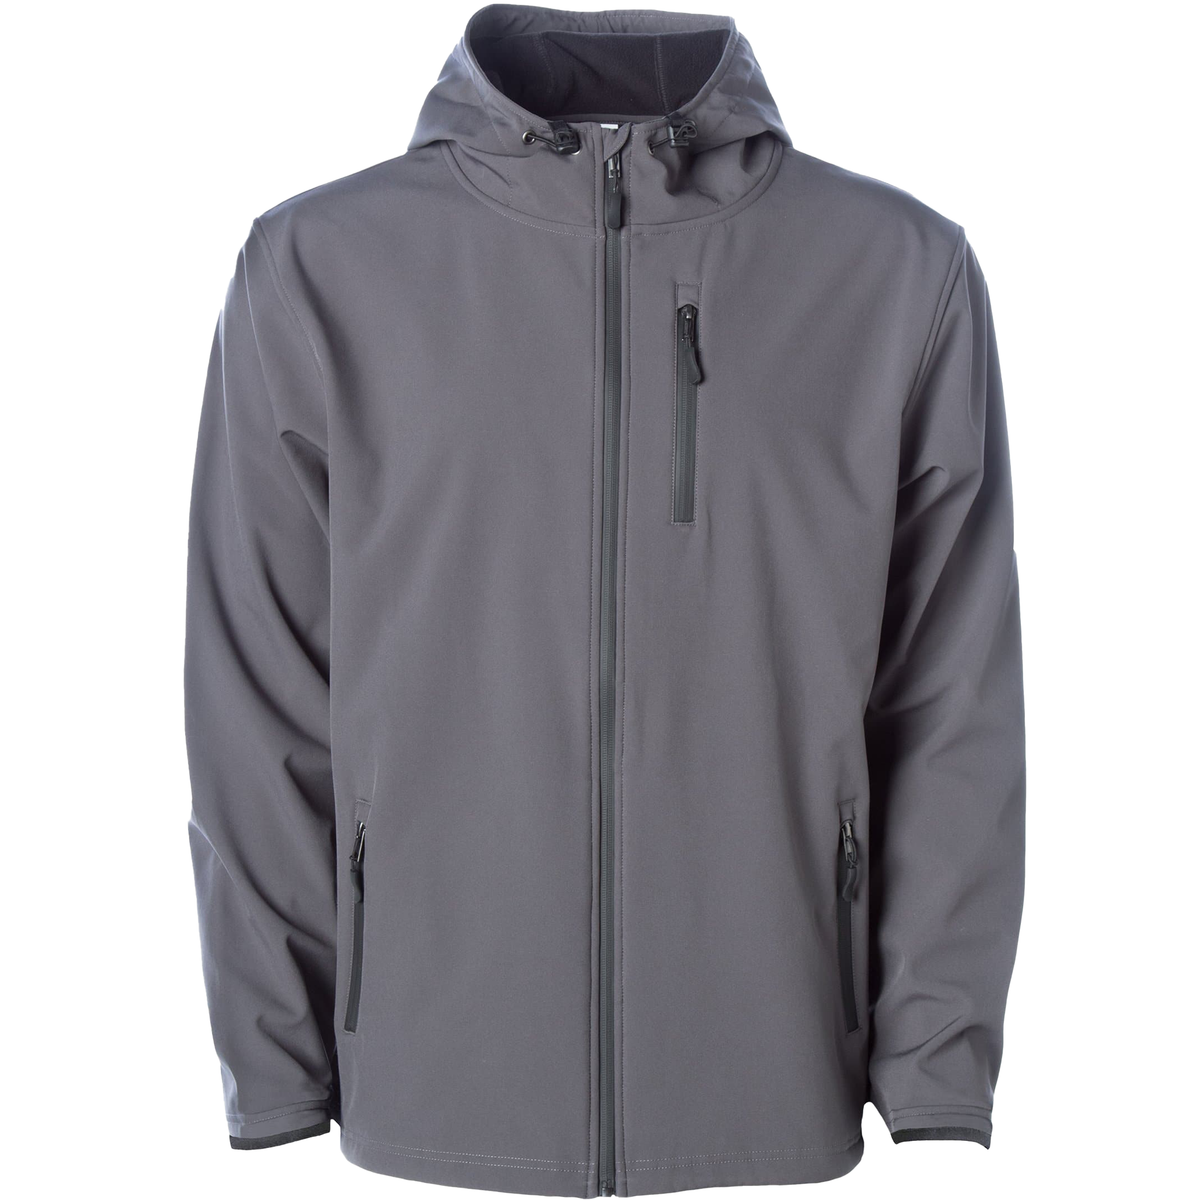 EXP35SSZ - Poly Tech Water Resistant Soft Shell Jacket